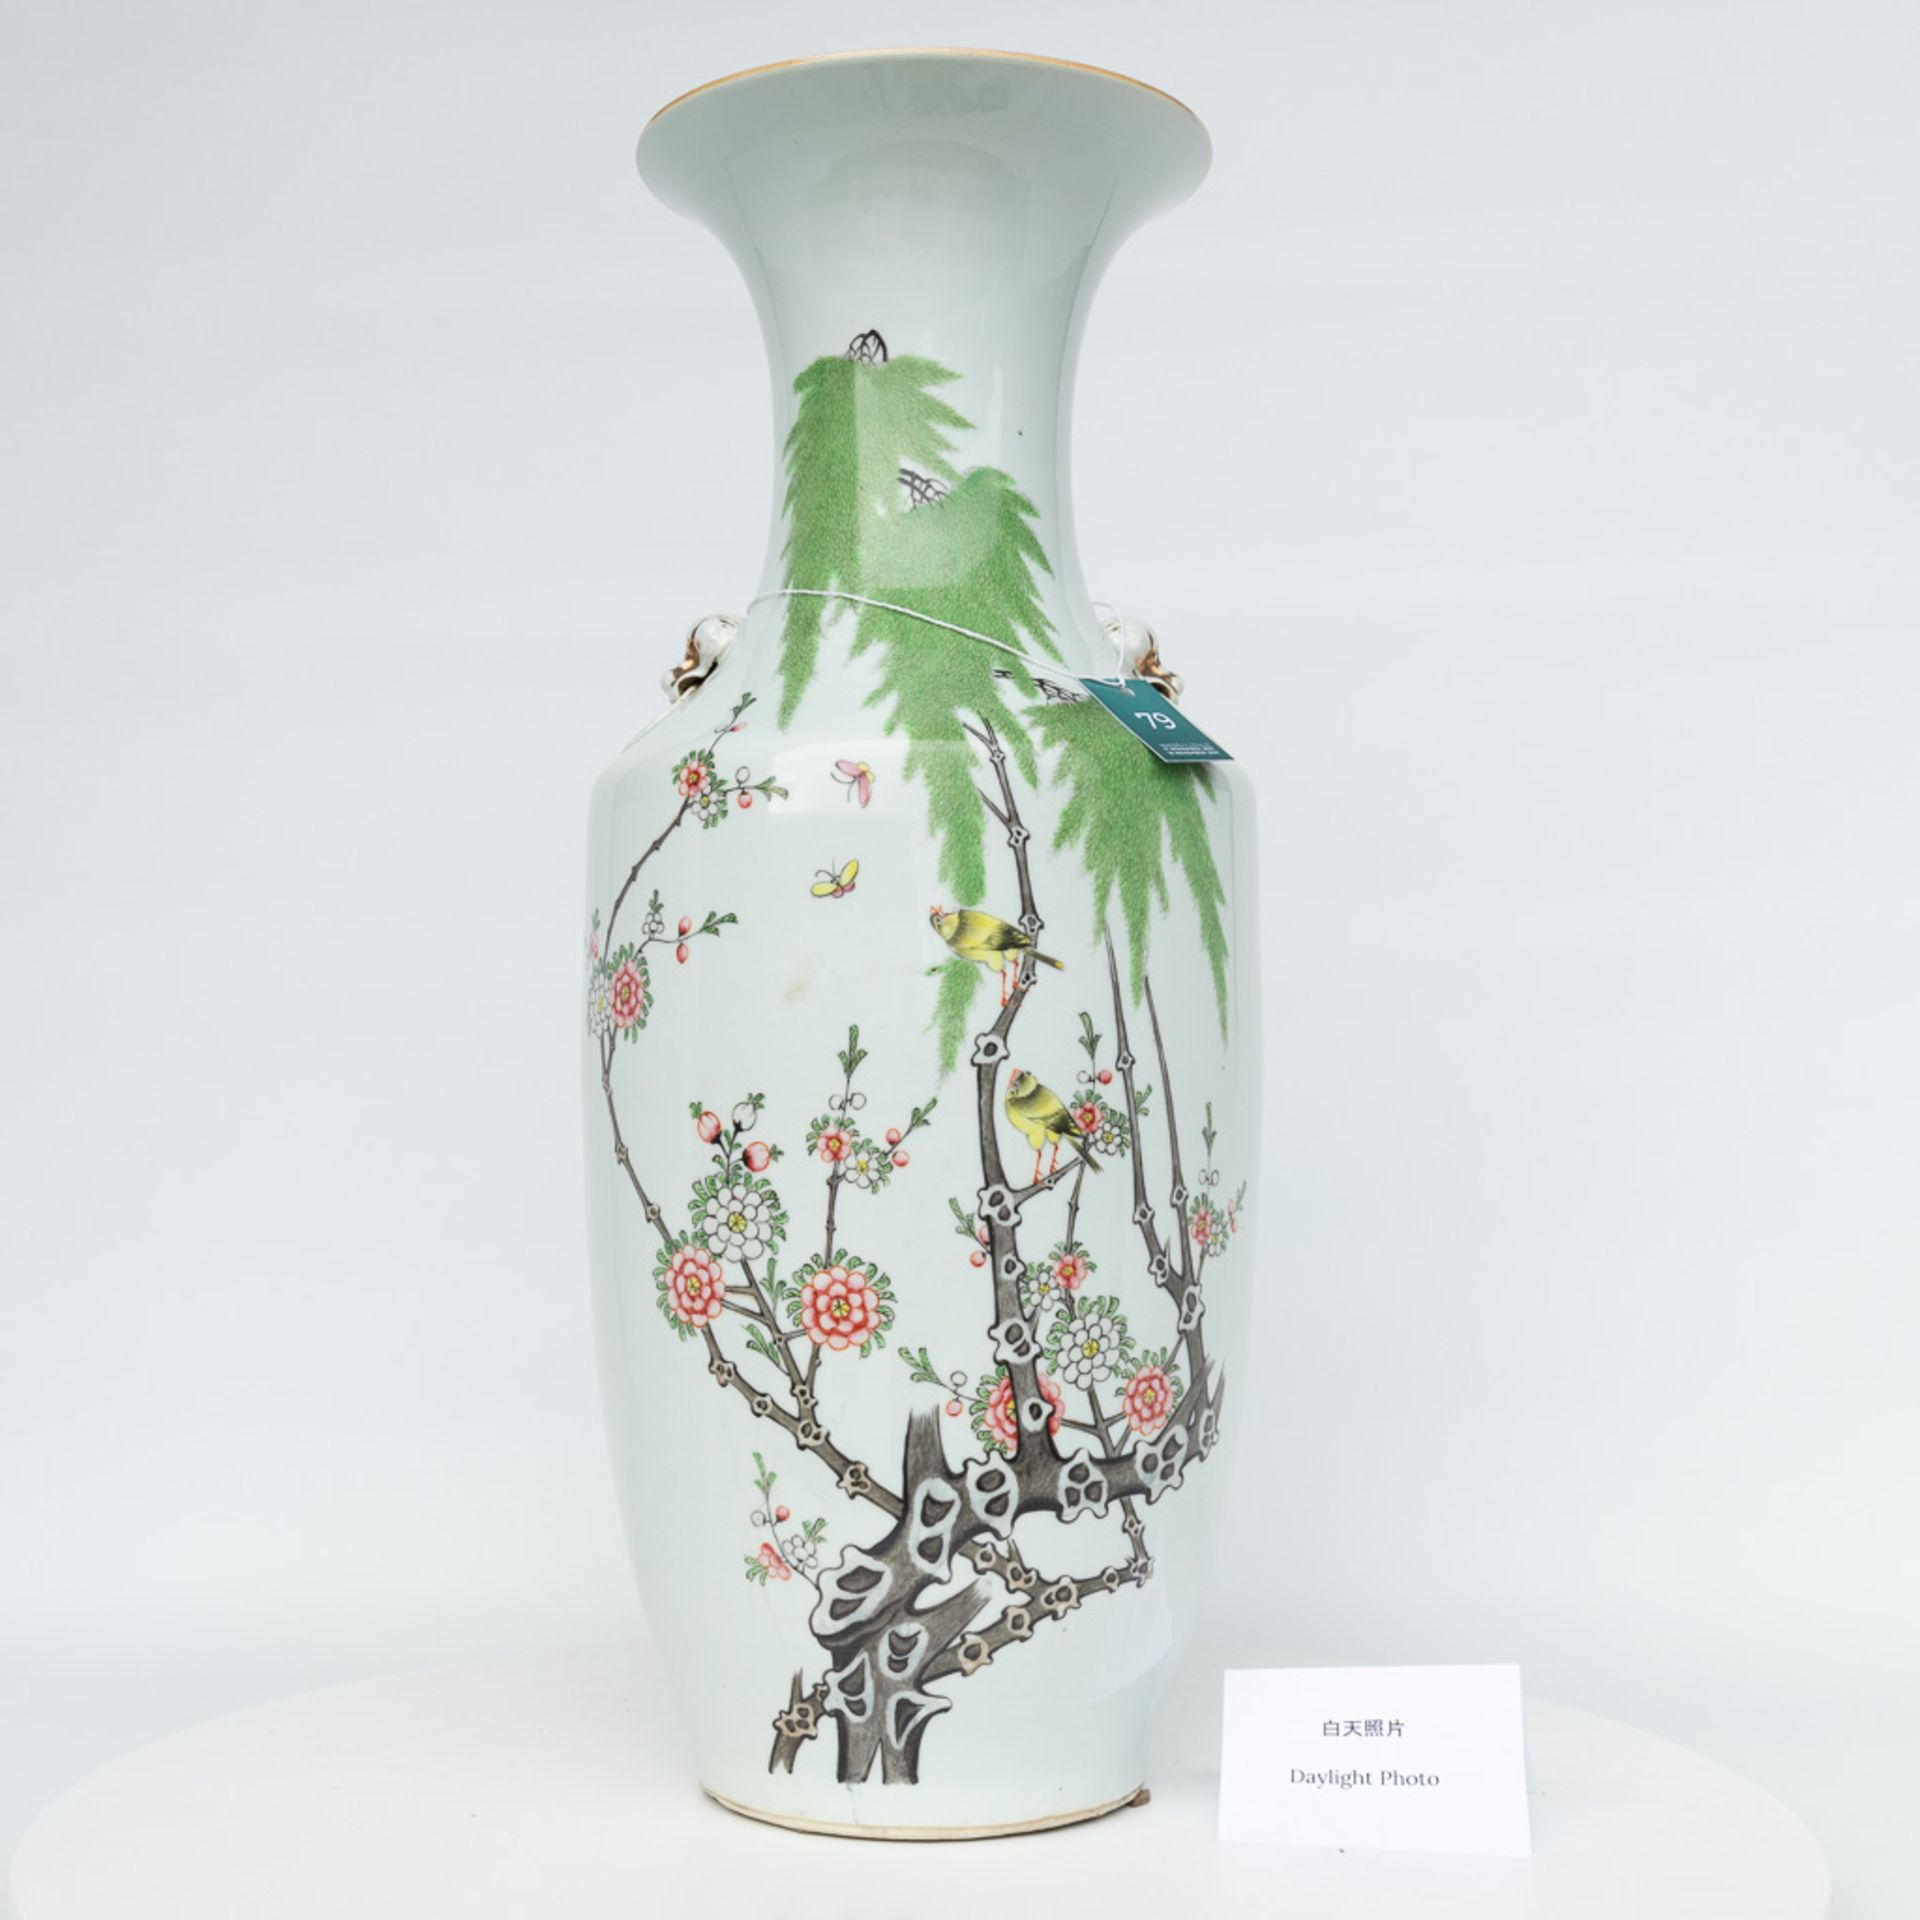 A vase made of Chinese porcelain and decorated with flowers and birds. - Image 15 of 16